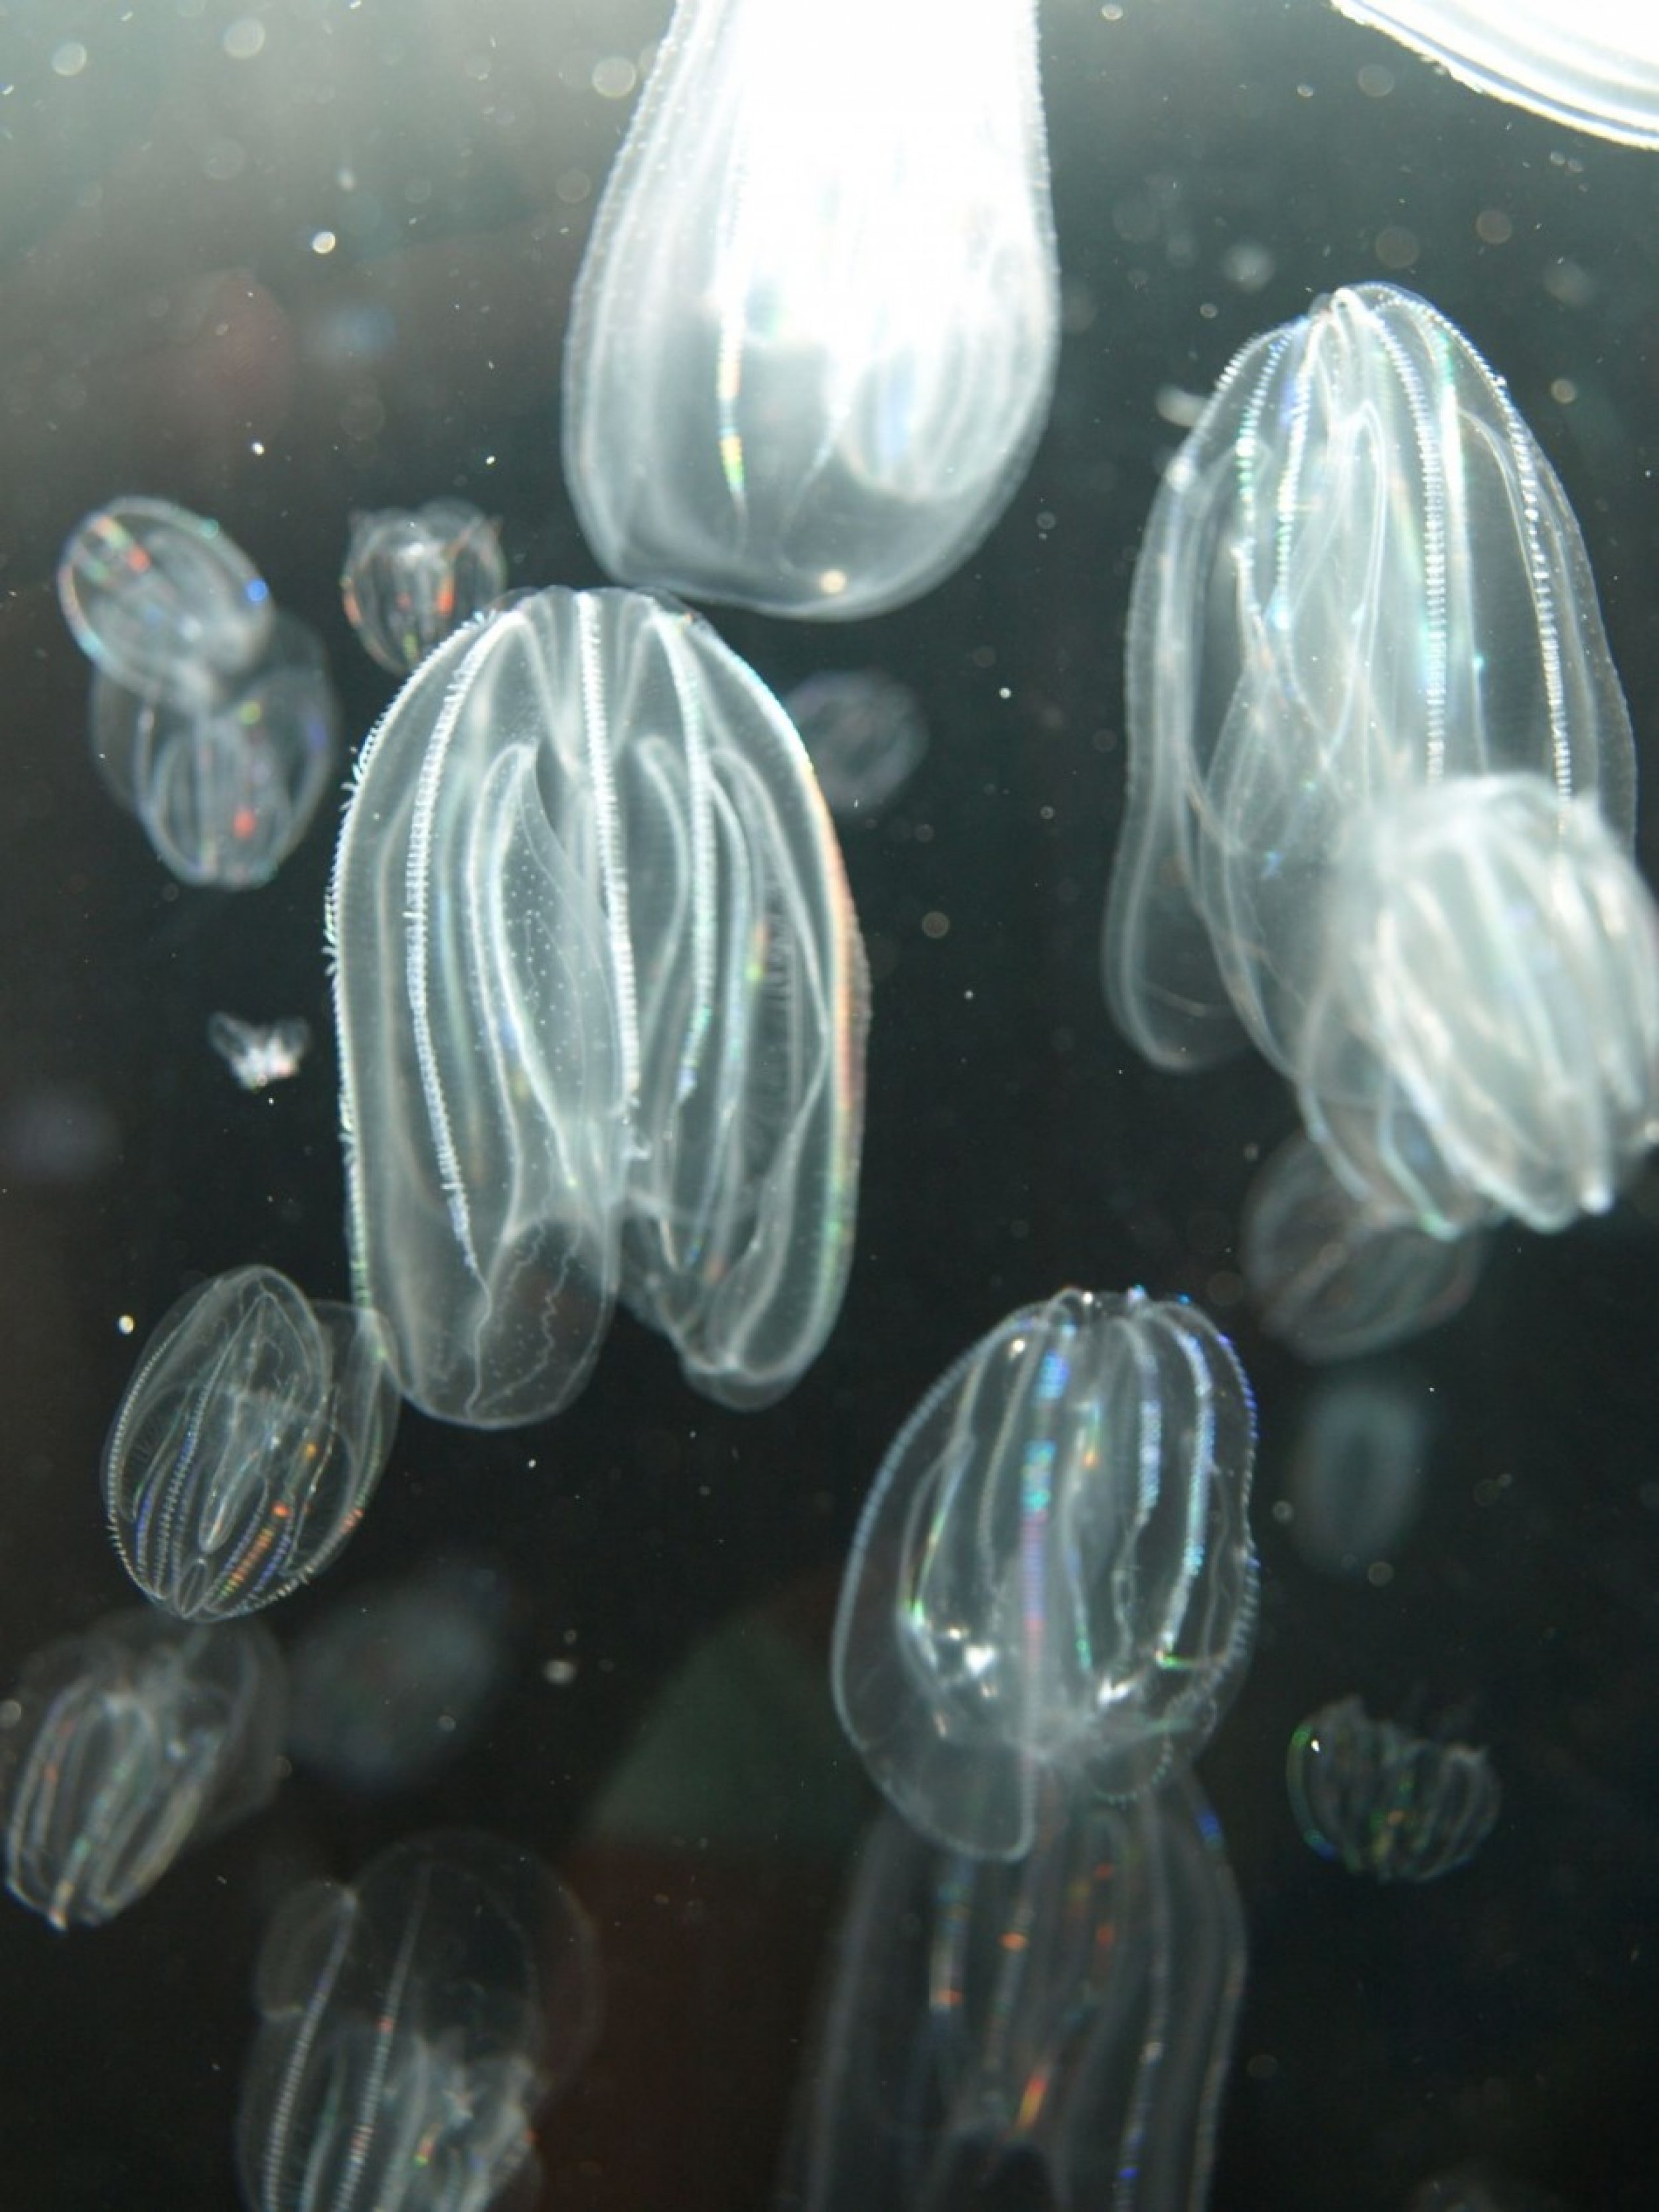 Millions of jellyfish invade nuclear reactors in Japan and Israel.